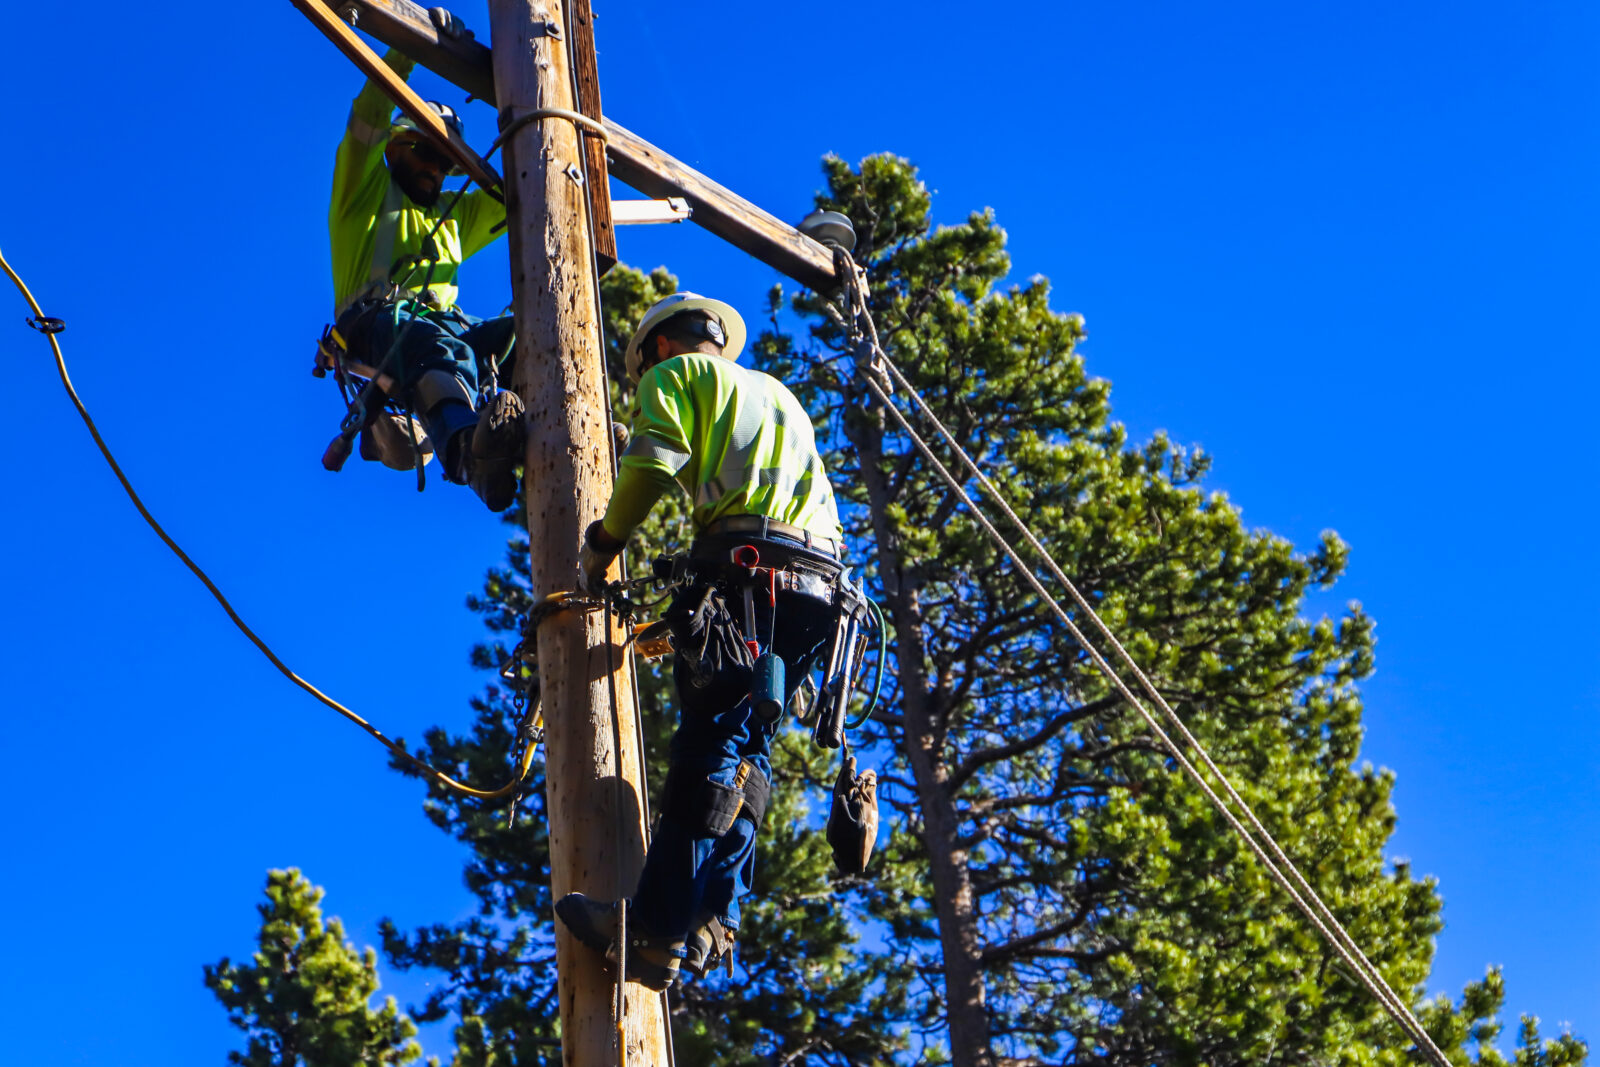 Two linemen work on an electric line.